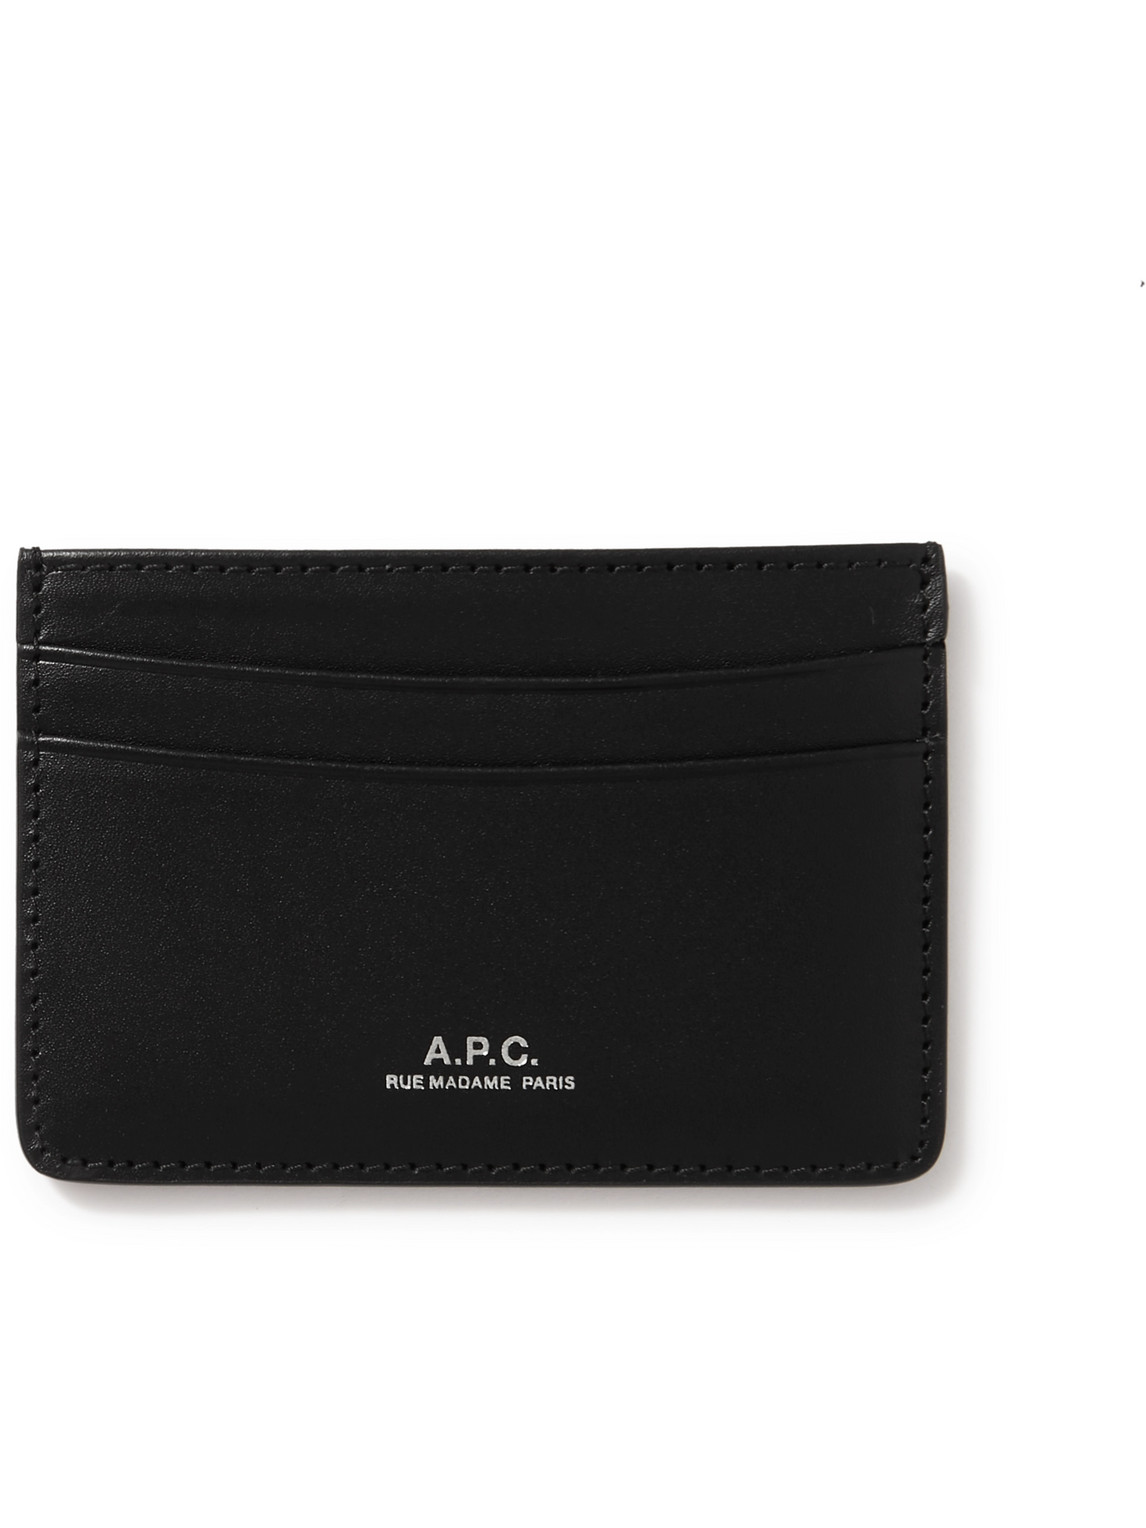 APC ANDRE LEATHER CARDHOLDER